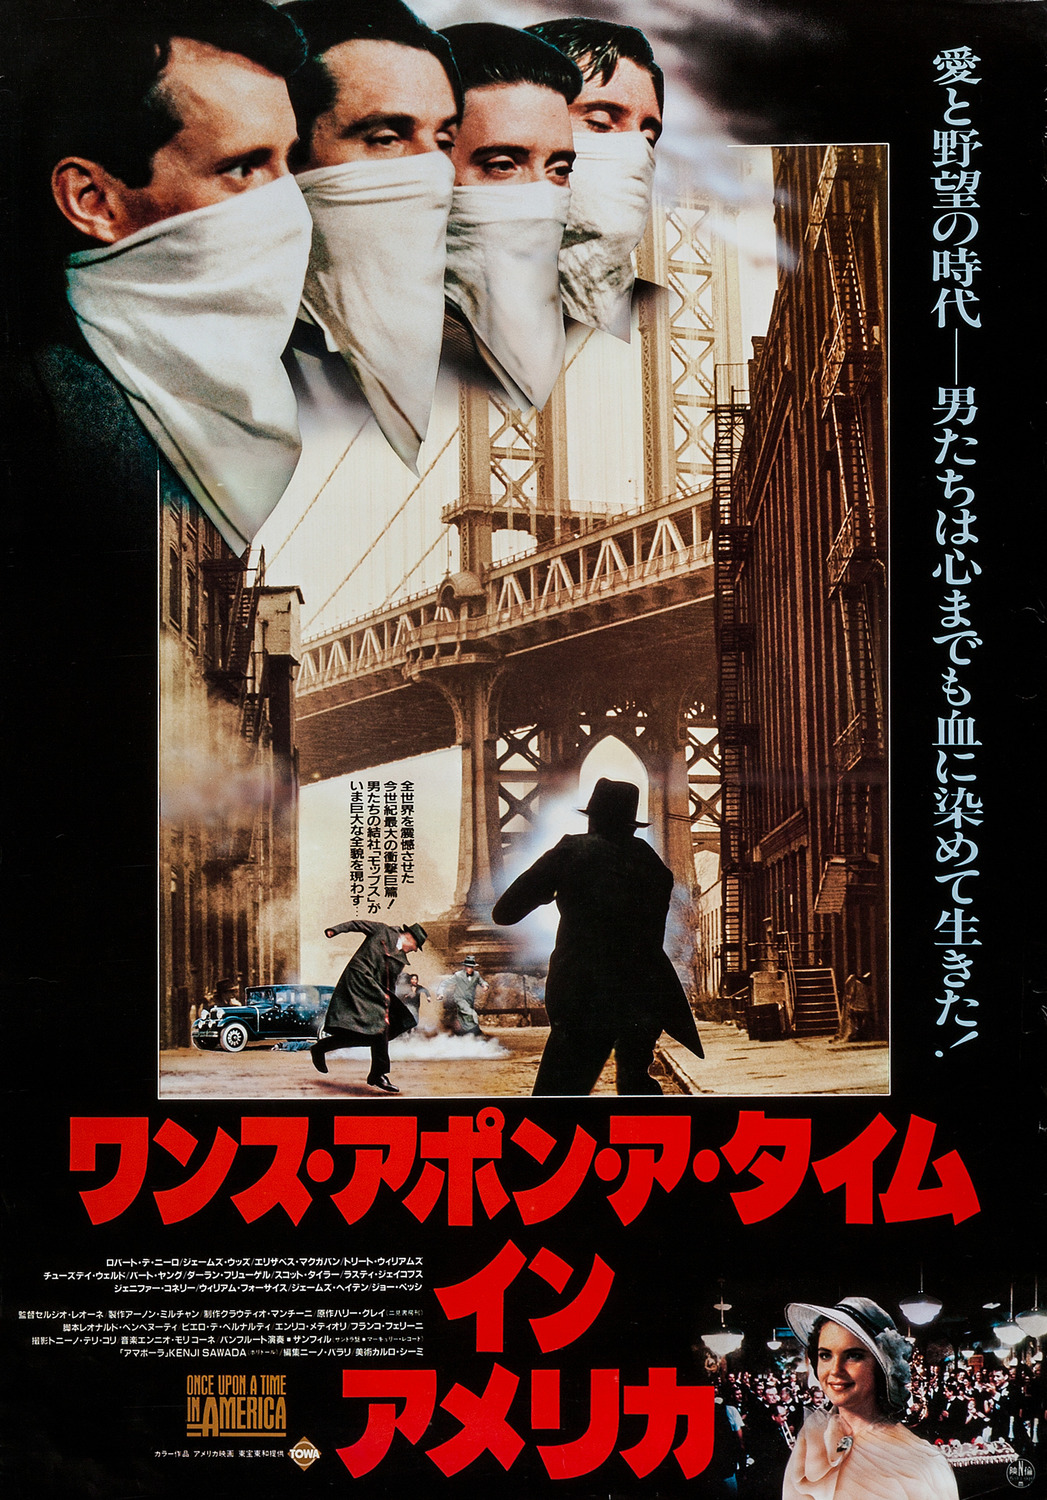 Extra Large Movie Poster Image for Once Upon a Time in America (#4 of 6)